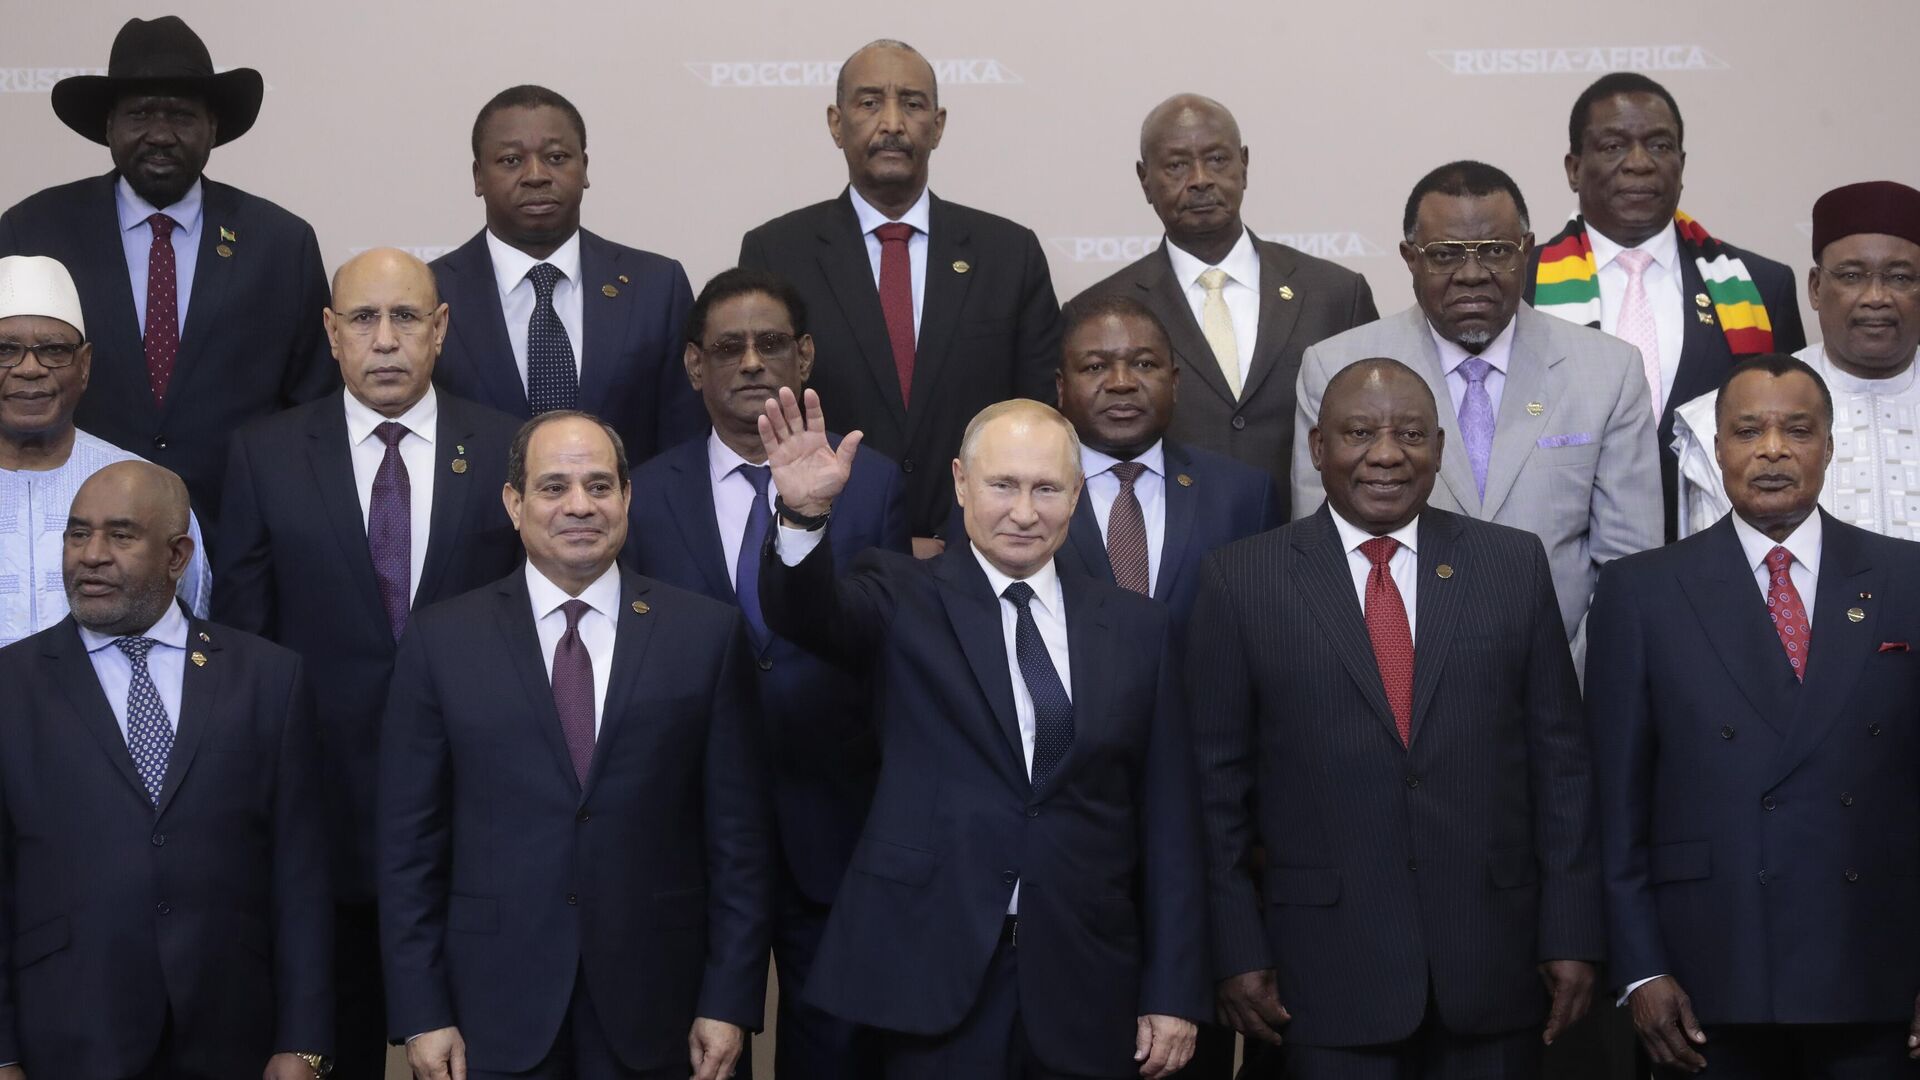 Russian President Vladimir Putin, center, poses for a photo with leaders of African countries at the Russia-Africa summit in the Black Sea resort of Sochi, Russia, on Oct. 24, 2019.  - Sputnik International, 1920, 28.12.2022